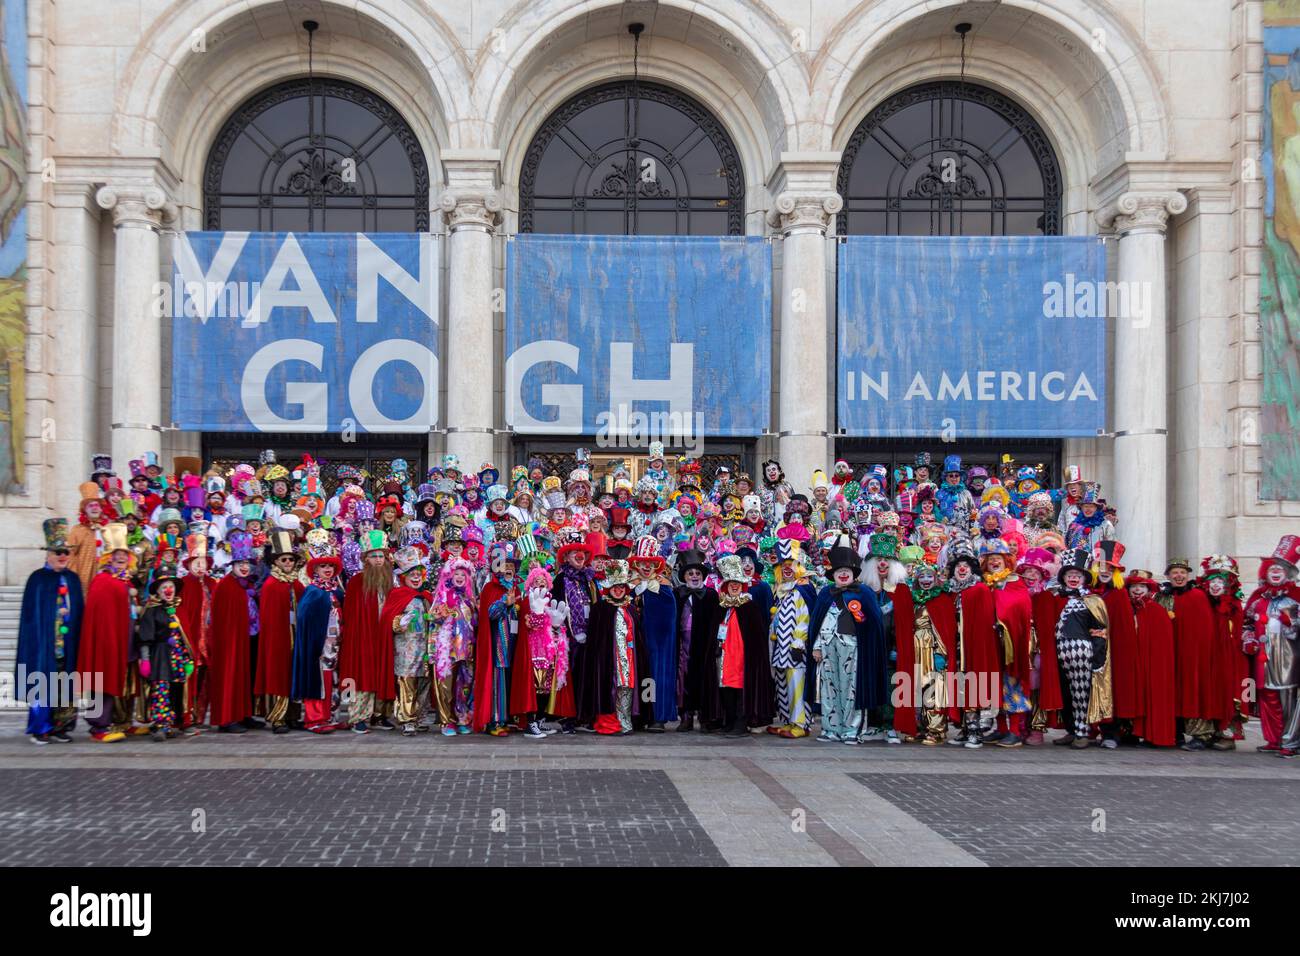 Detroit, Michigan, USA. 24th Nov, 2022. Clowns pose at the Detroit Institute of Arts before Detroit's Thanksgiving Day parade. The DIA is featuring a Van Gogh exhibit. Credit: Jim West/Alamy Live News Stock Photo